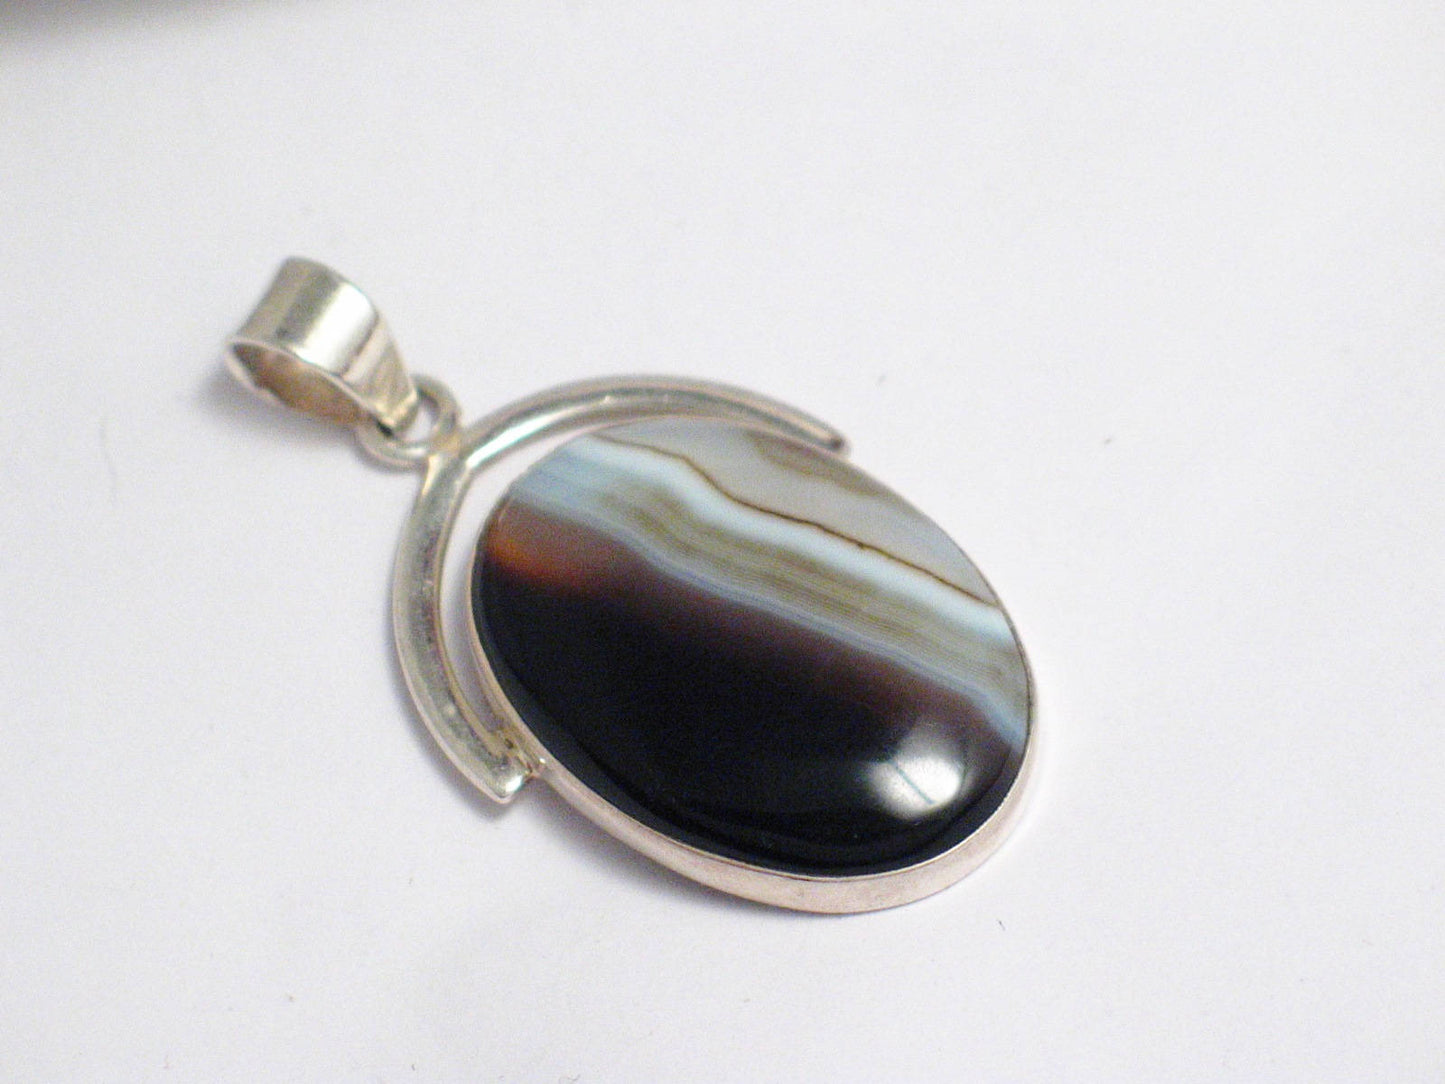 Pendant | The Yin & Yang Large Sterling Silver Oval Banded Agate Stone Pendant | Blingschlingers Jewelry